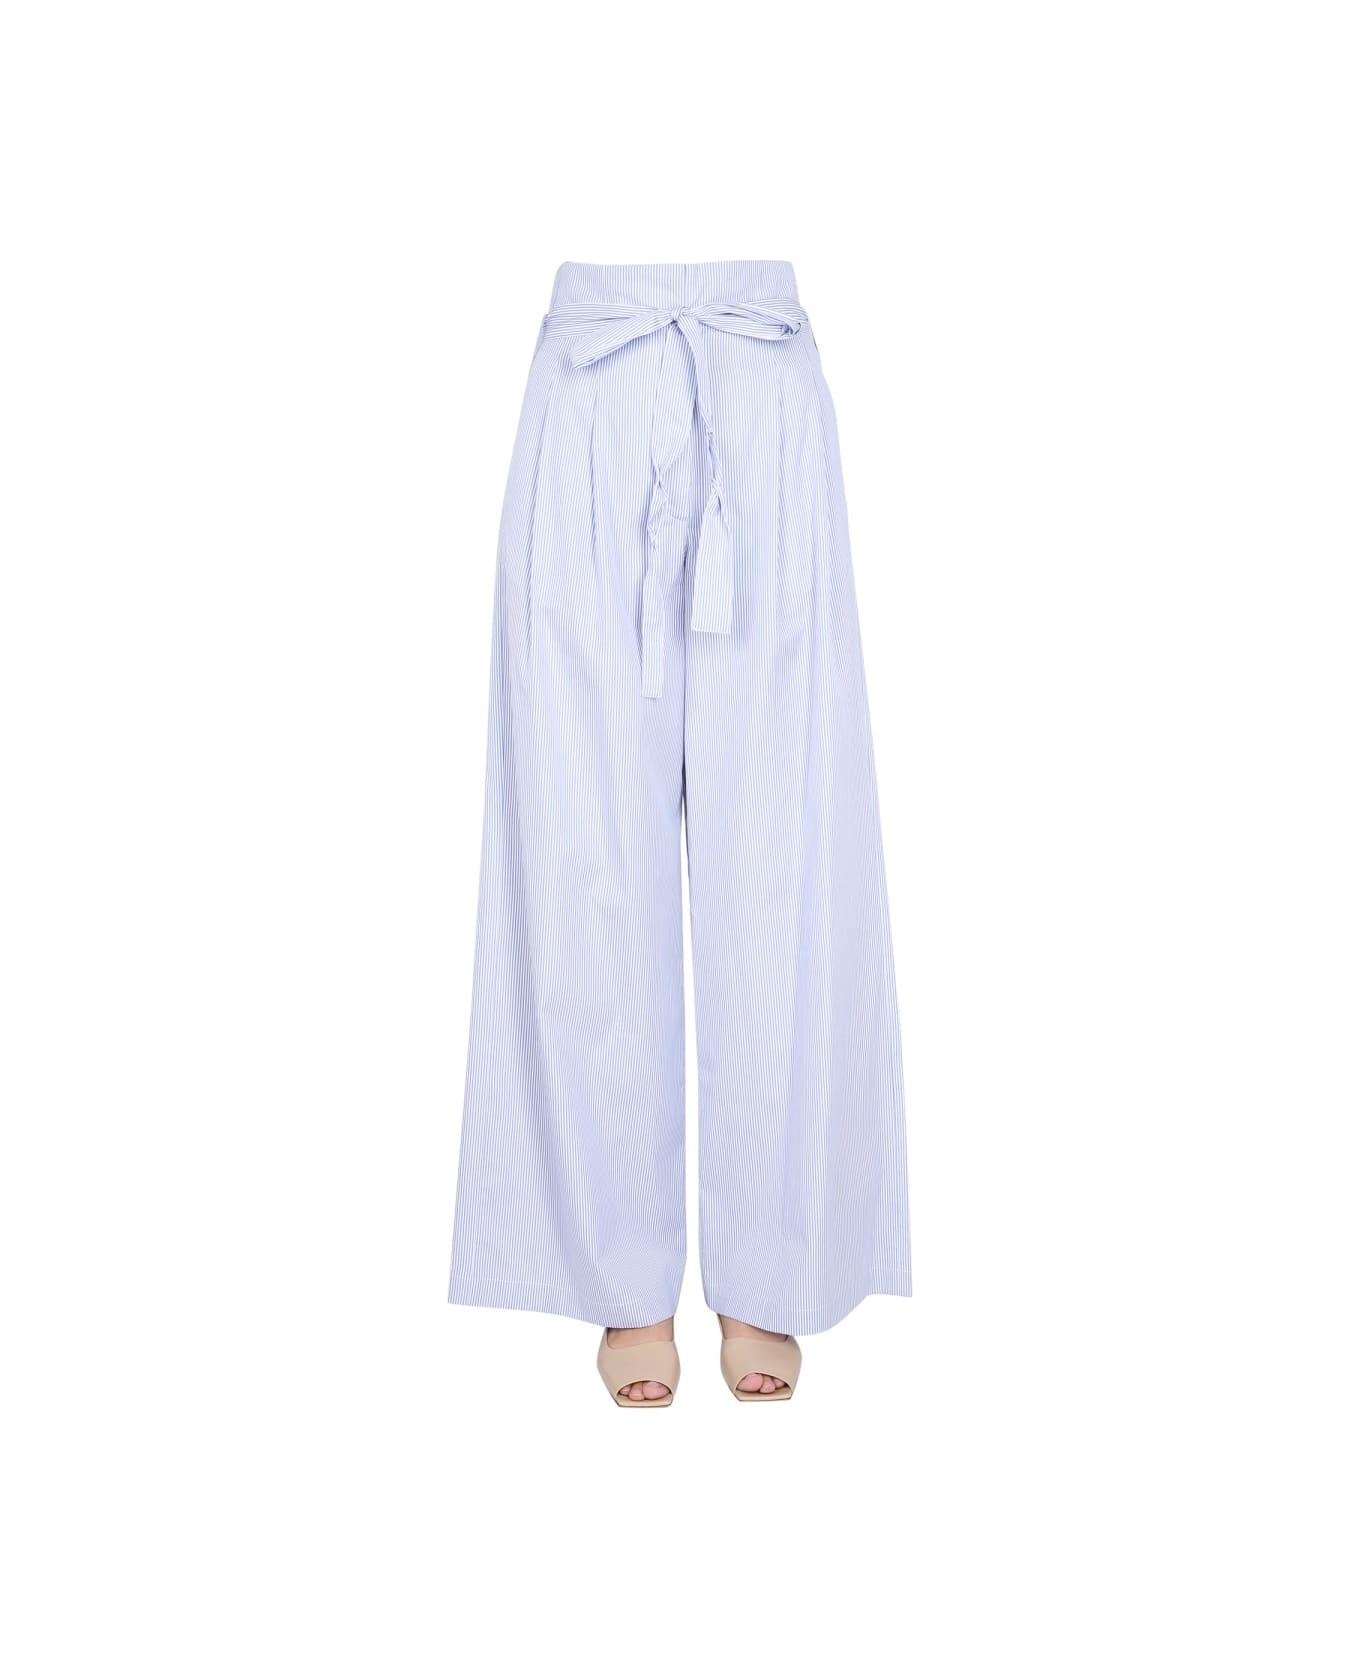 Jejia "sophie" Trousers - AZURE ボトムス